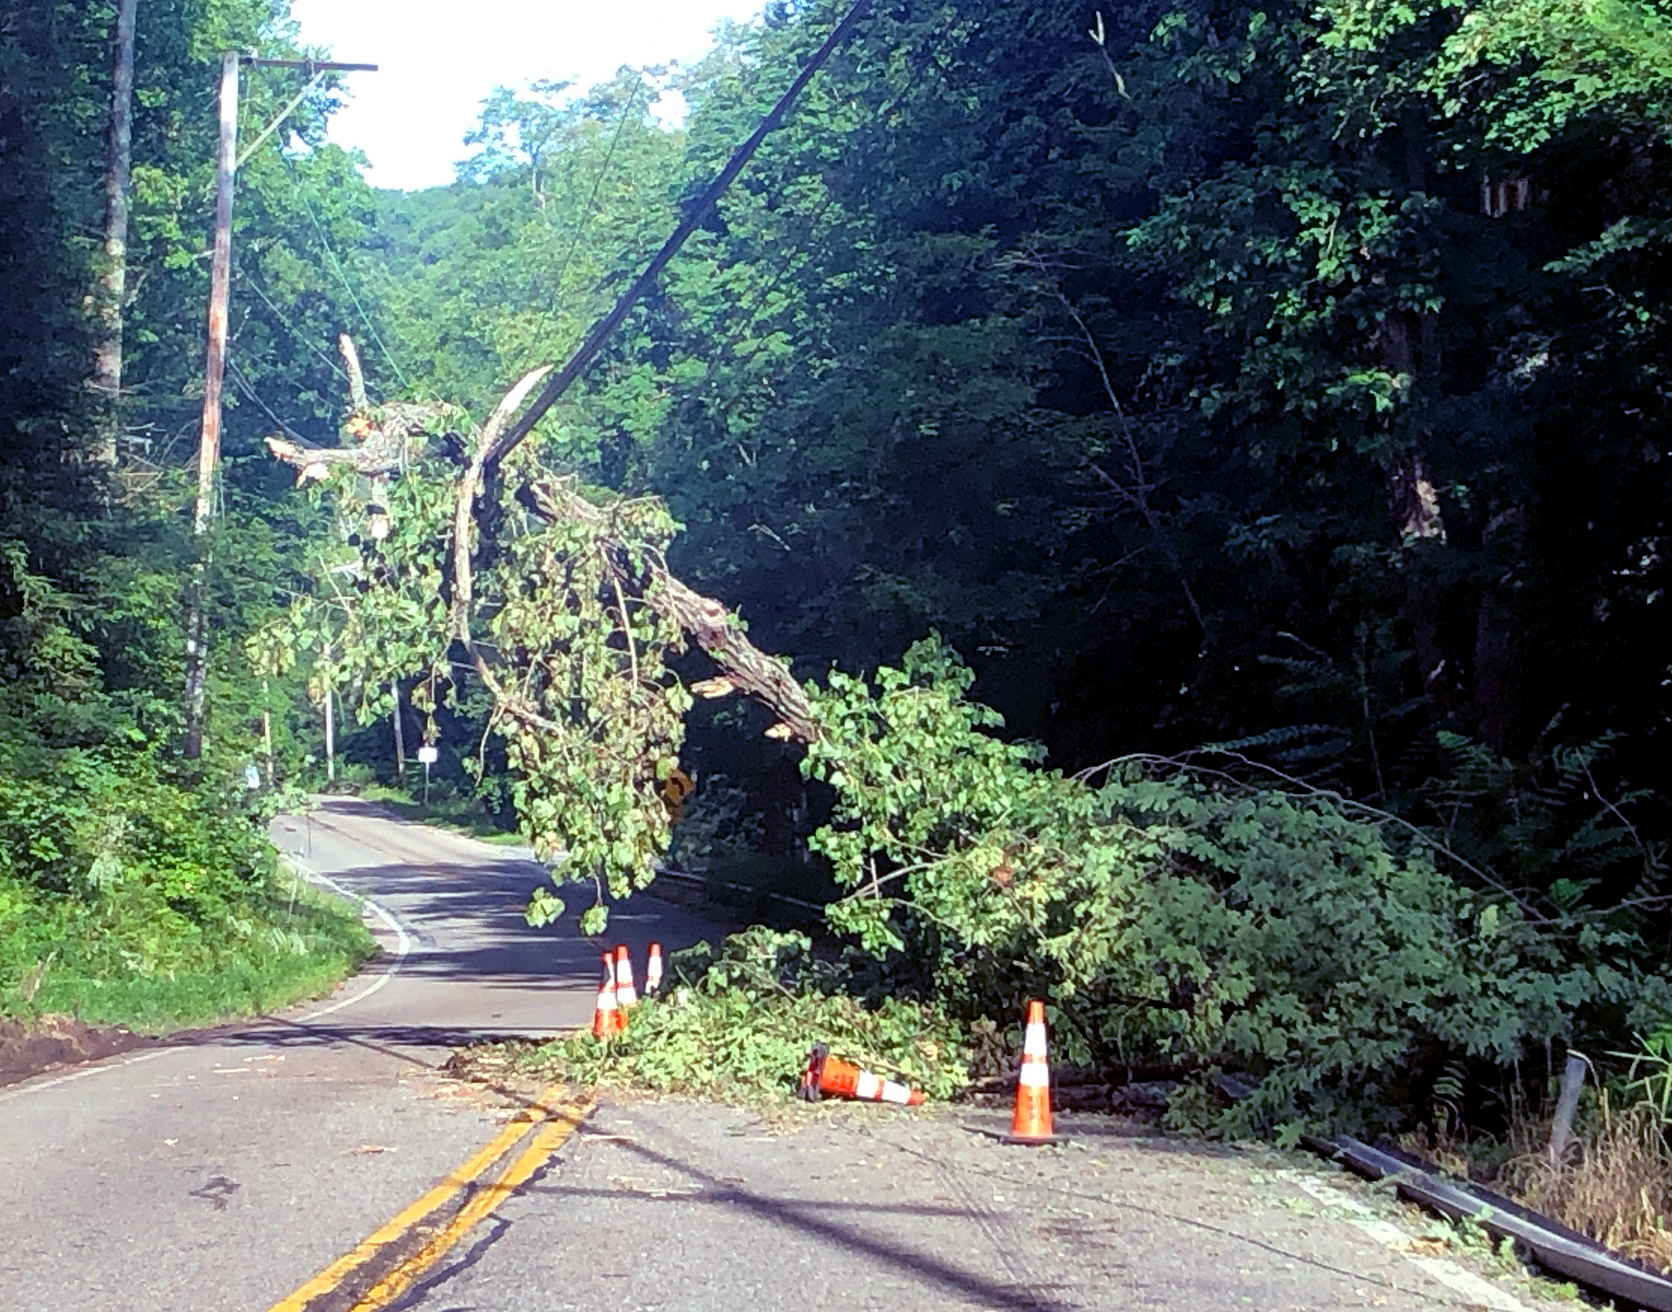 A large tree leans precariously on a powerline over Route 301 near CloudVisit’s Hudson Valley offices